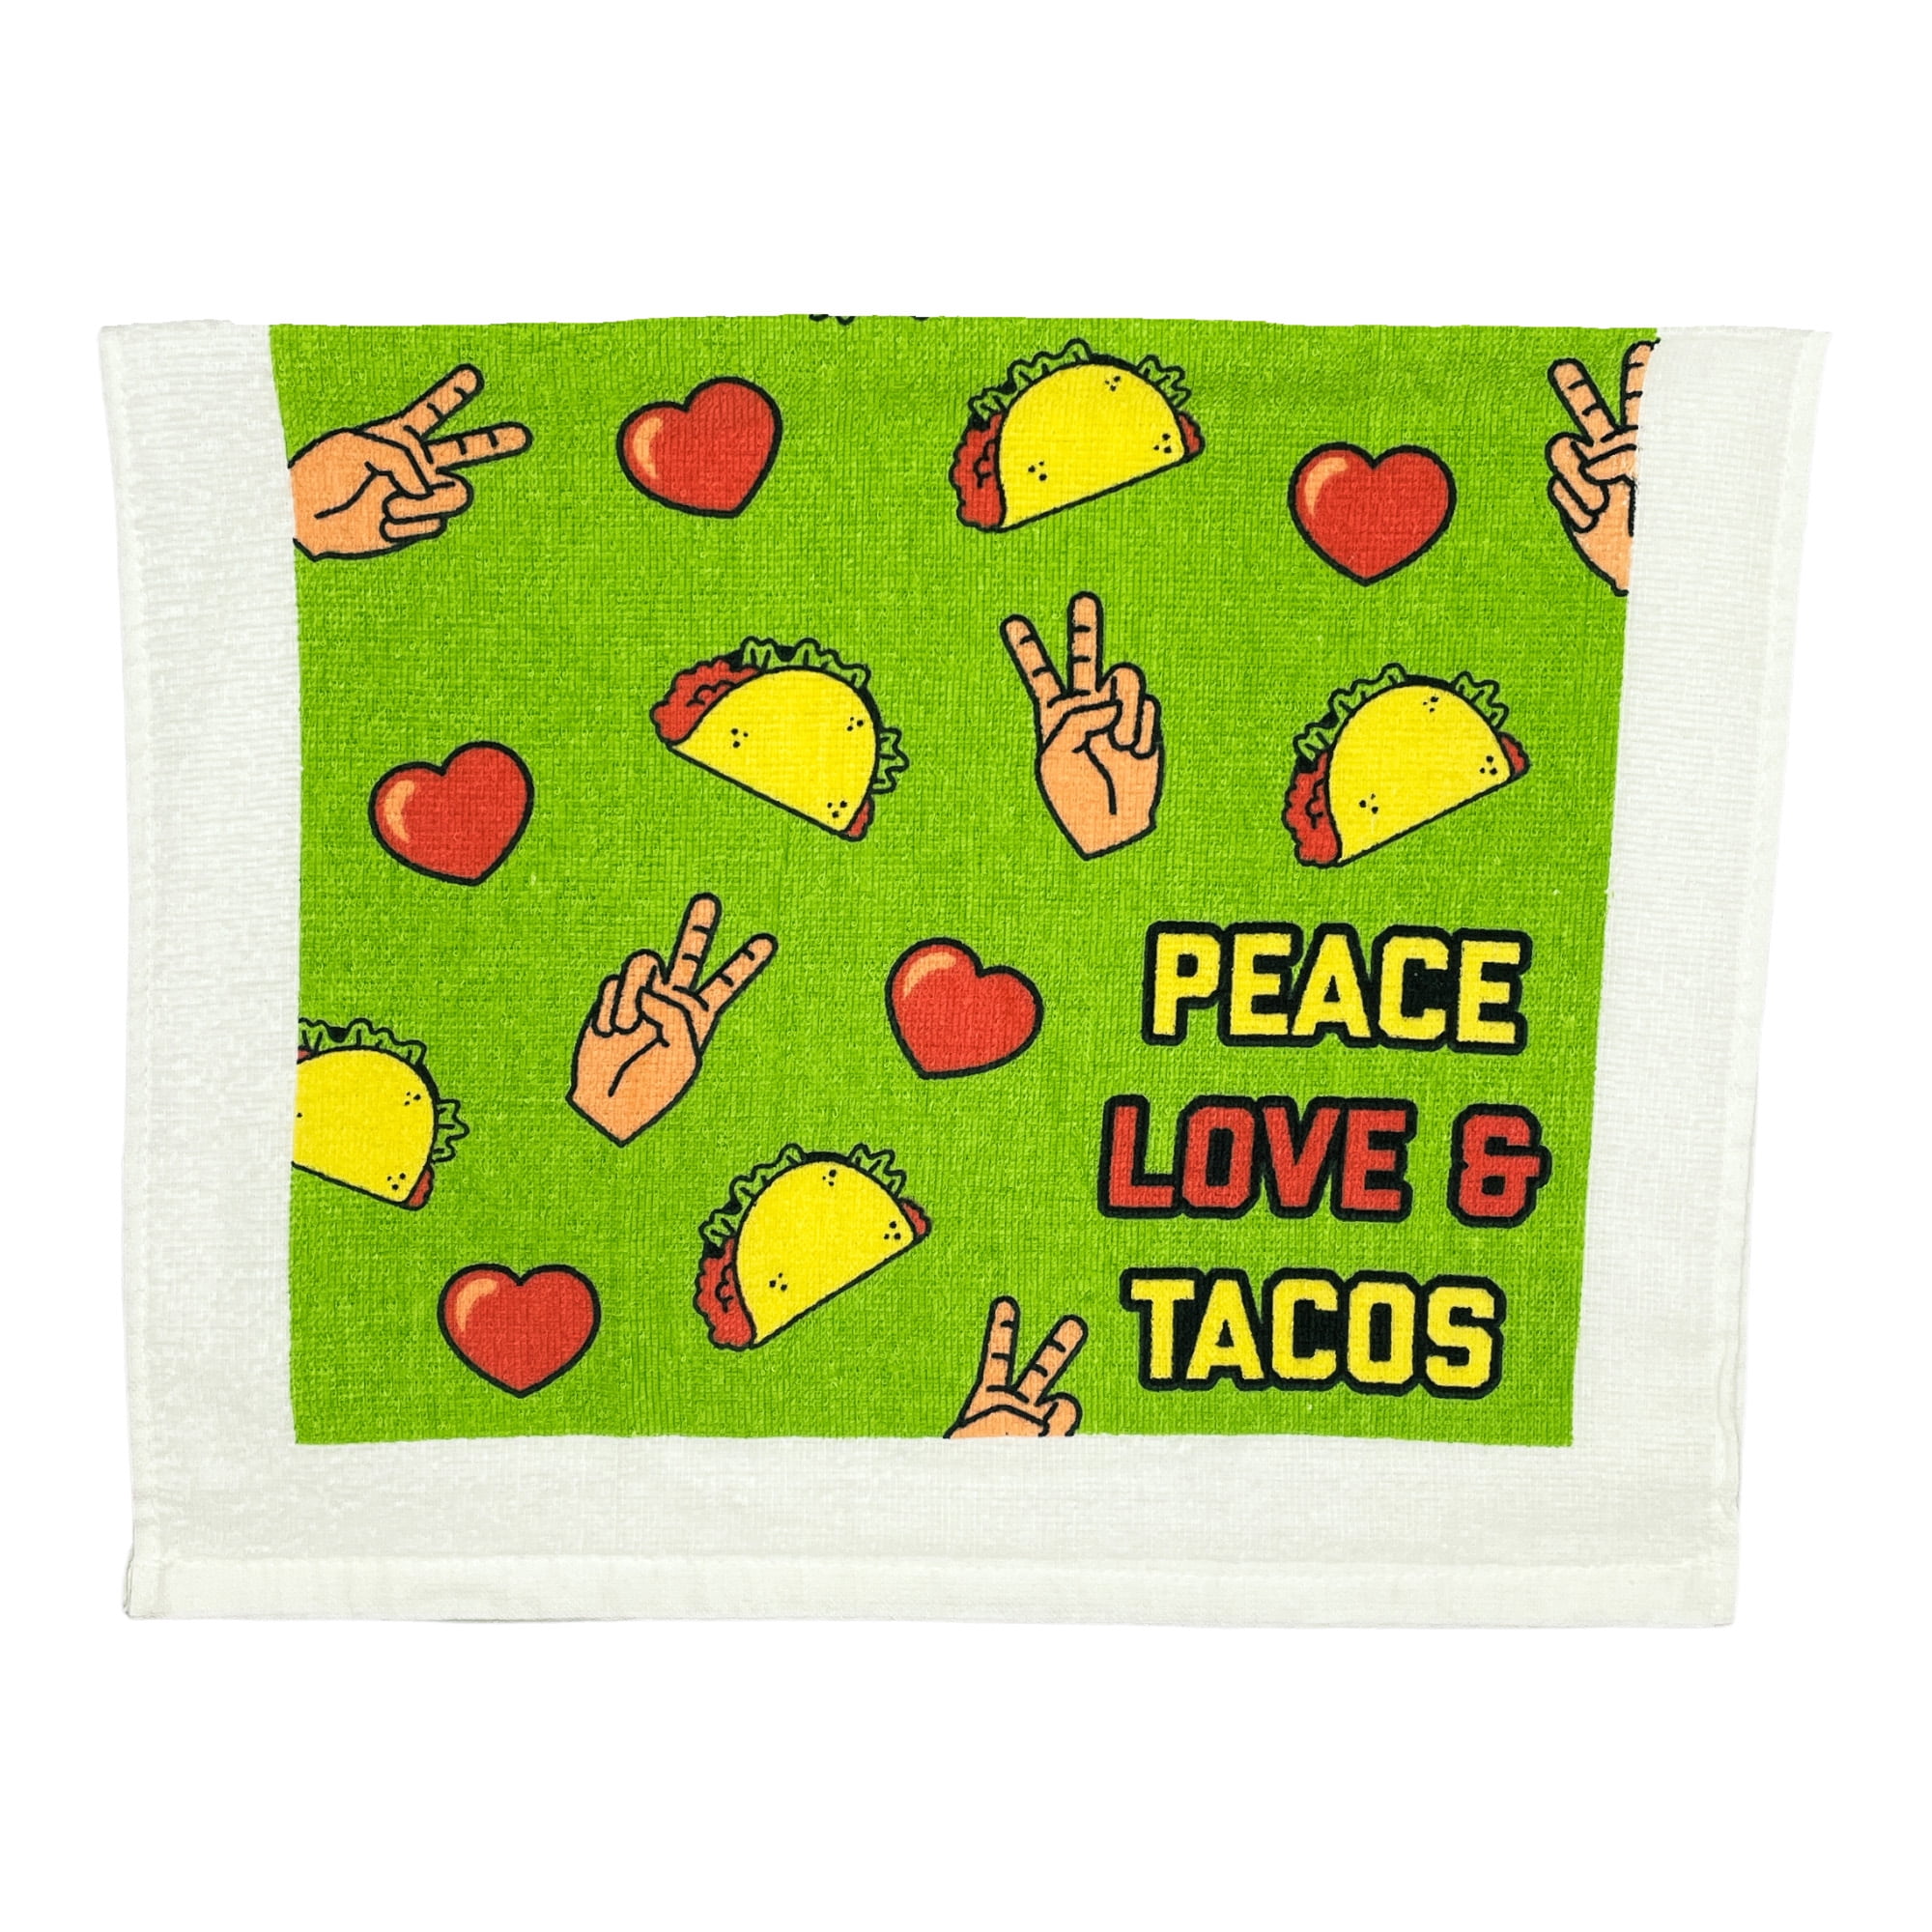 Funny Kitchen Dish Towels for Taco Lovers Cute Decorative Joke Towels Set